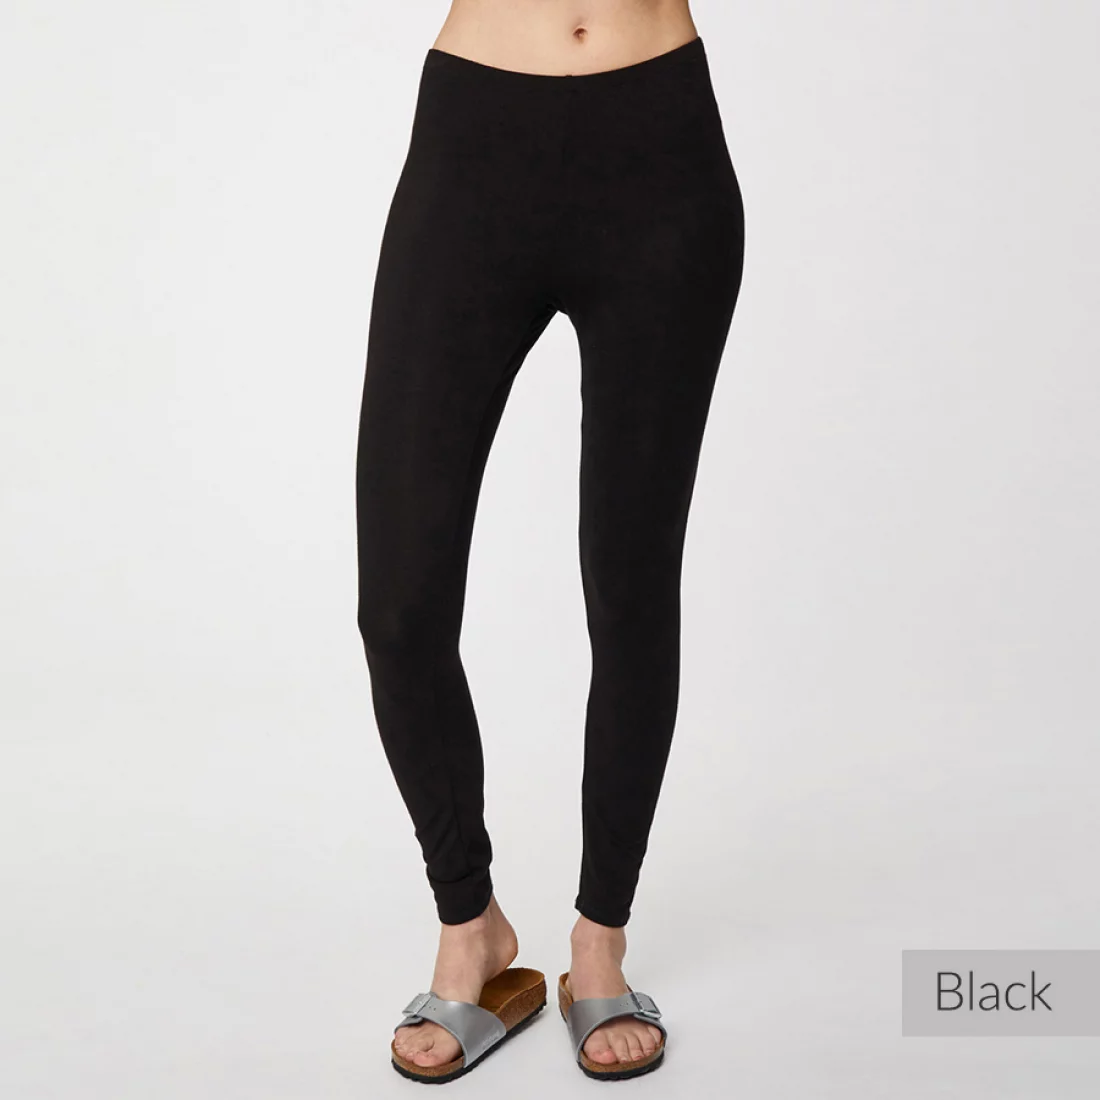 Are Bamboo Leggings Good? 5 Reasons Why They Are!